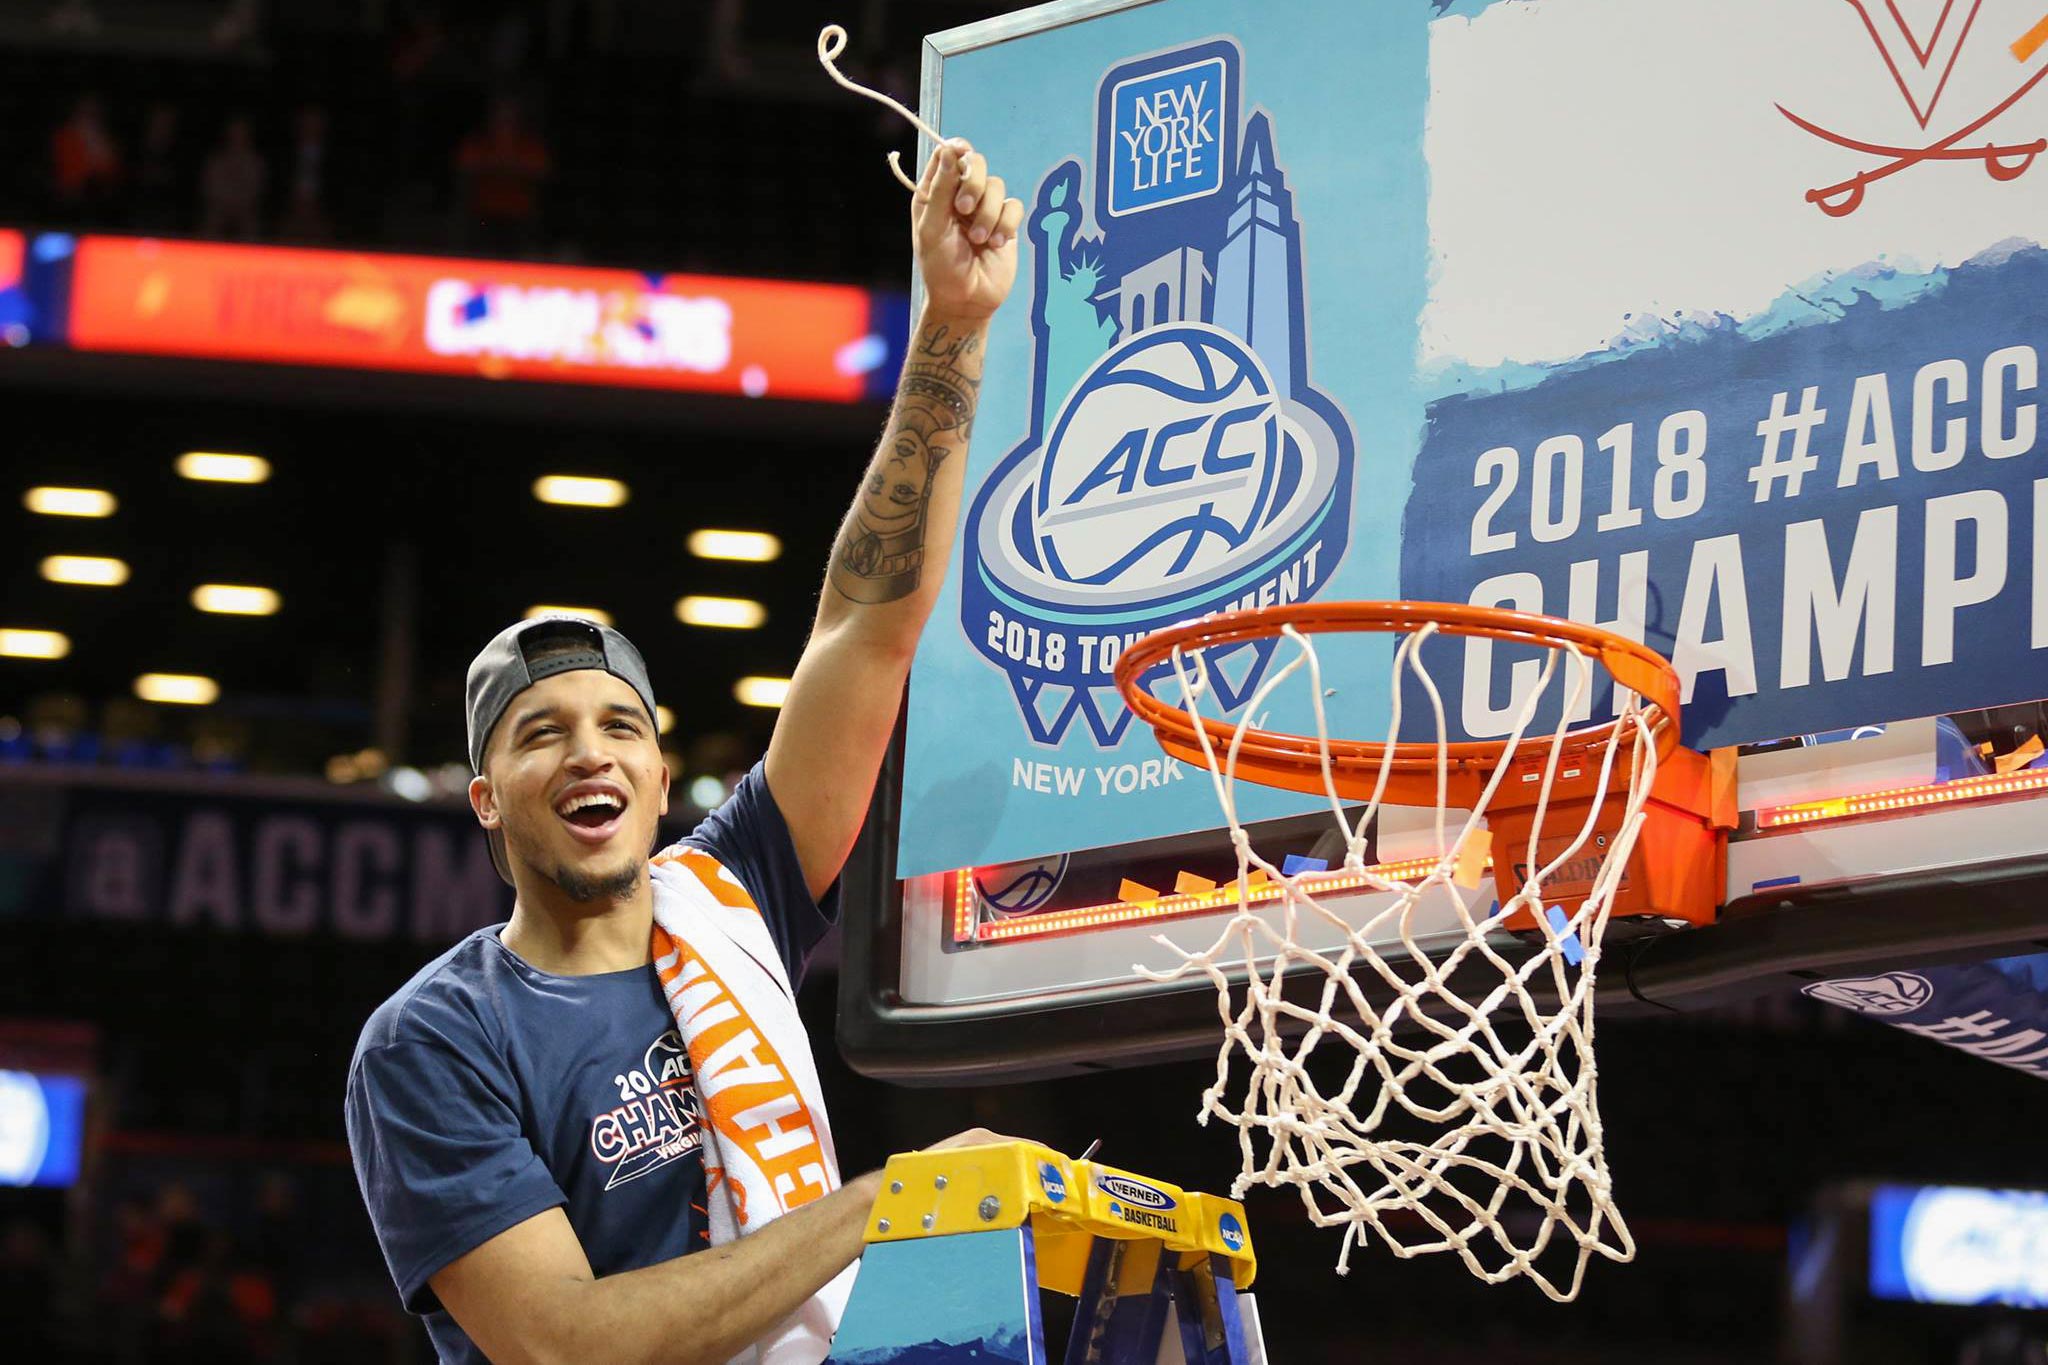 Wilkins cutting down the ACC championship basketball net